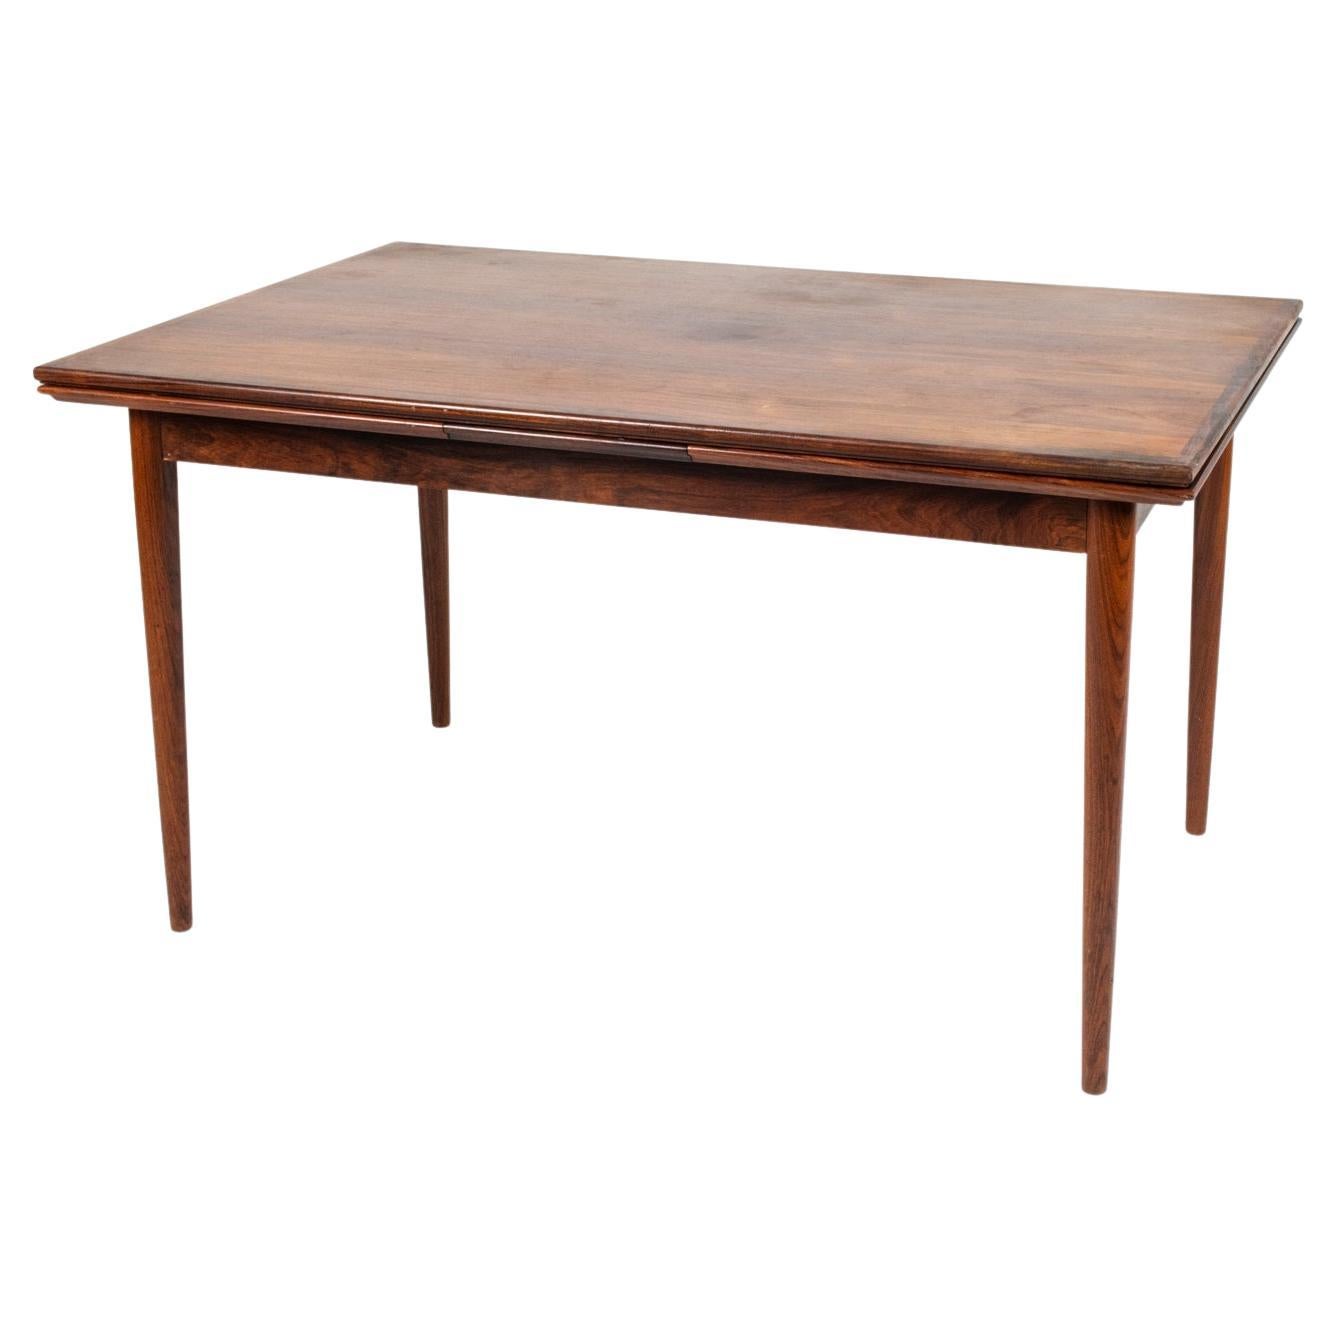 Danish Mid-Century Rosewood Extension Dining Table, c. 1960's For Sale